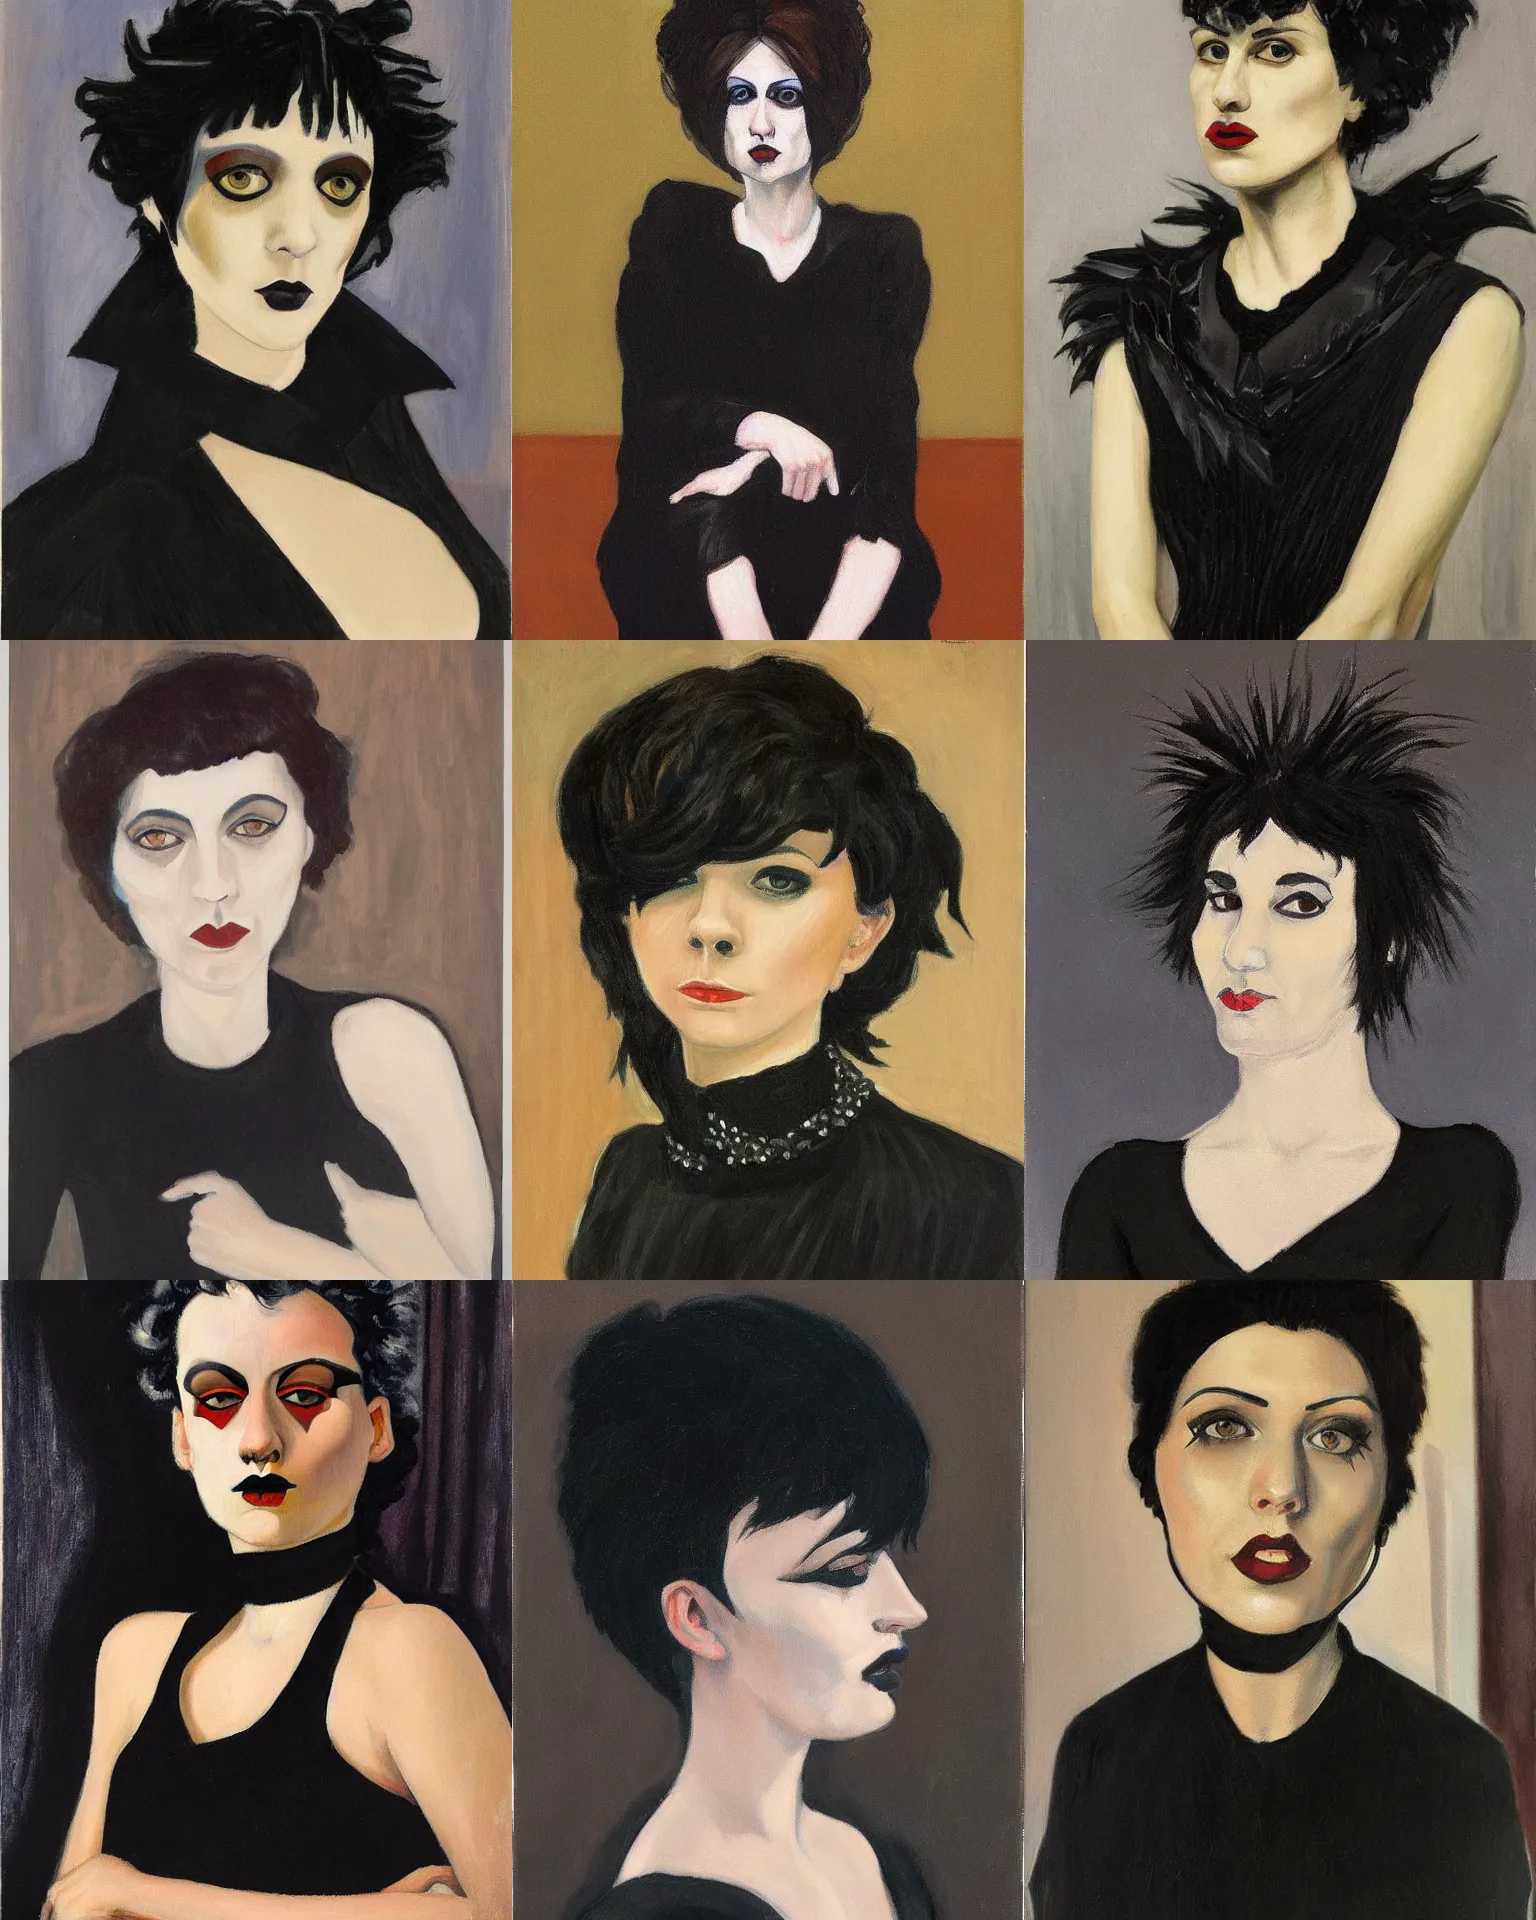 Prompt: A goth portrait painted by Giacomo Balla. Her hair is dark brown and cut into a short, messy pixie cut. She has a slightly rounded face, with a pointed chin, large entirely-black eyes, and a small nose. She is wearing a black tank top, a black leather jacket, a black knee-length skirt, a black choker, and black leather boots.